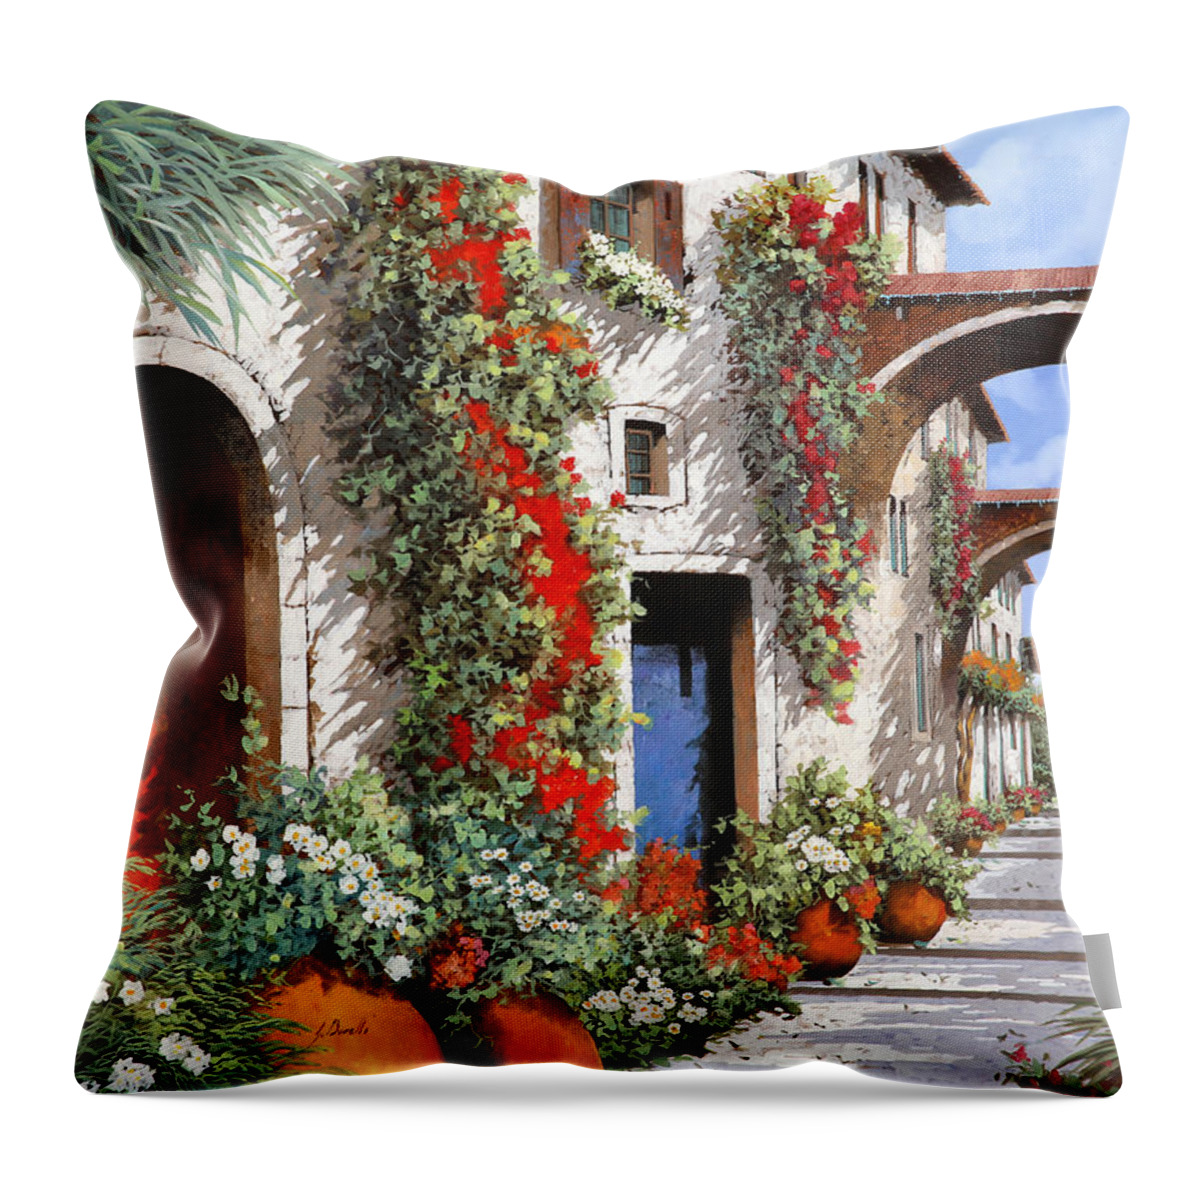 Red Door Throw Pillow featuring the painting Porta Rossa Porta Blu by Guido Borelli